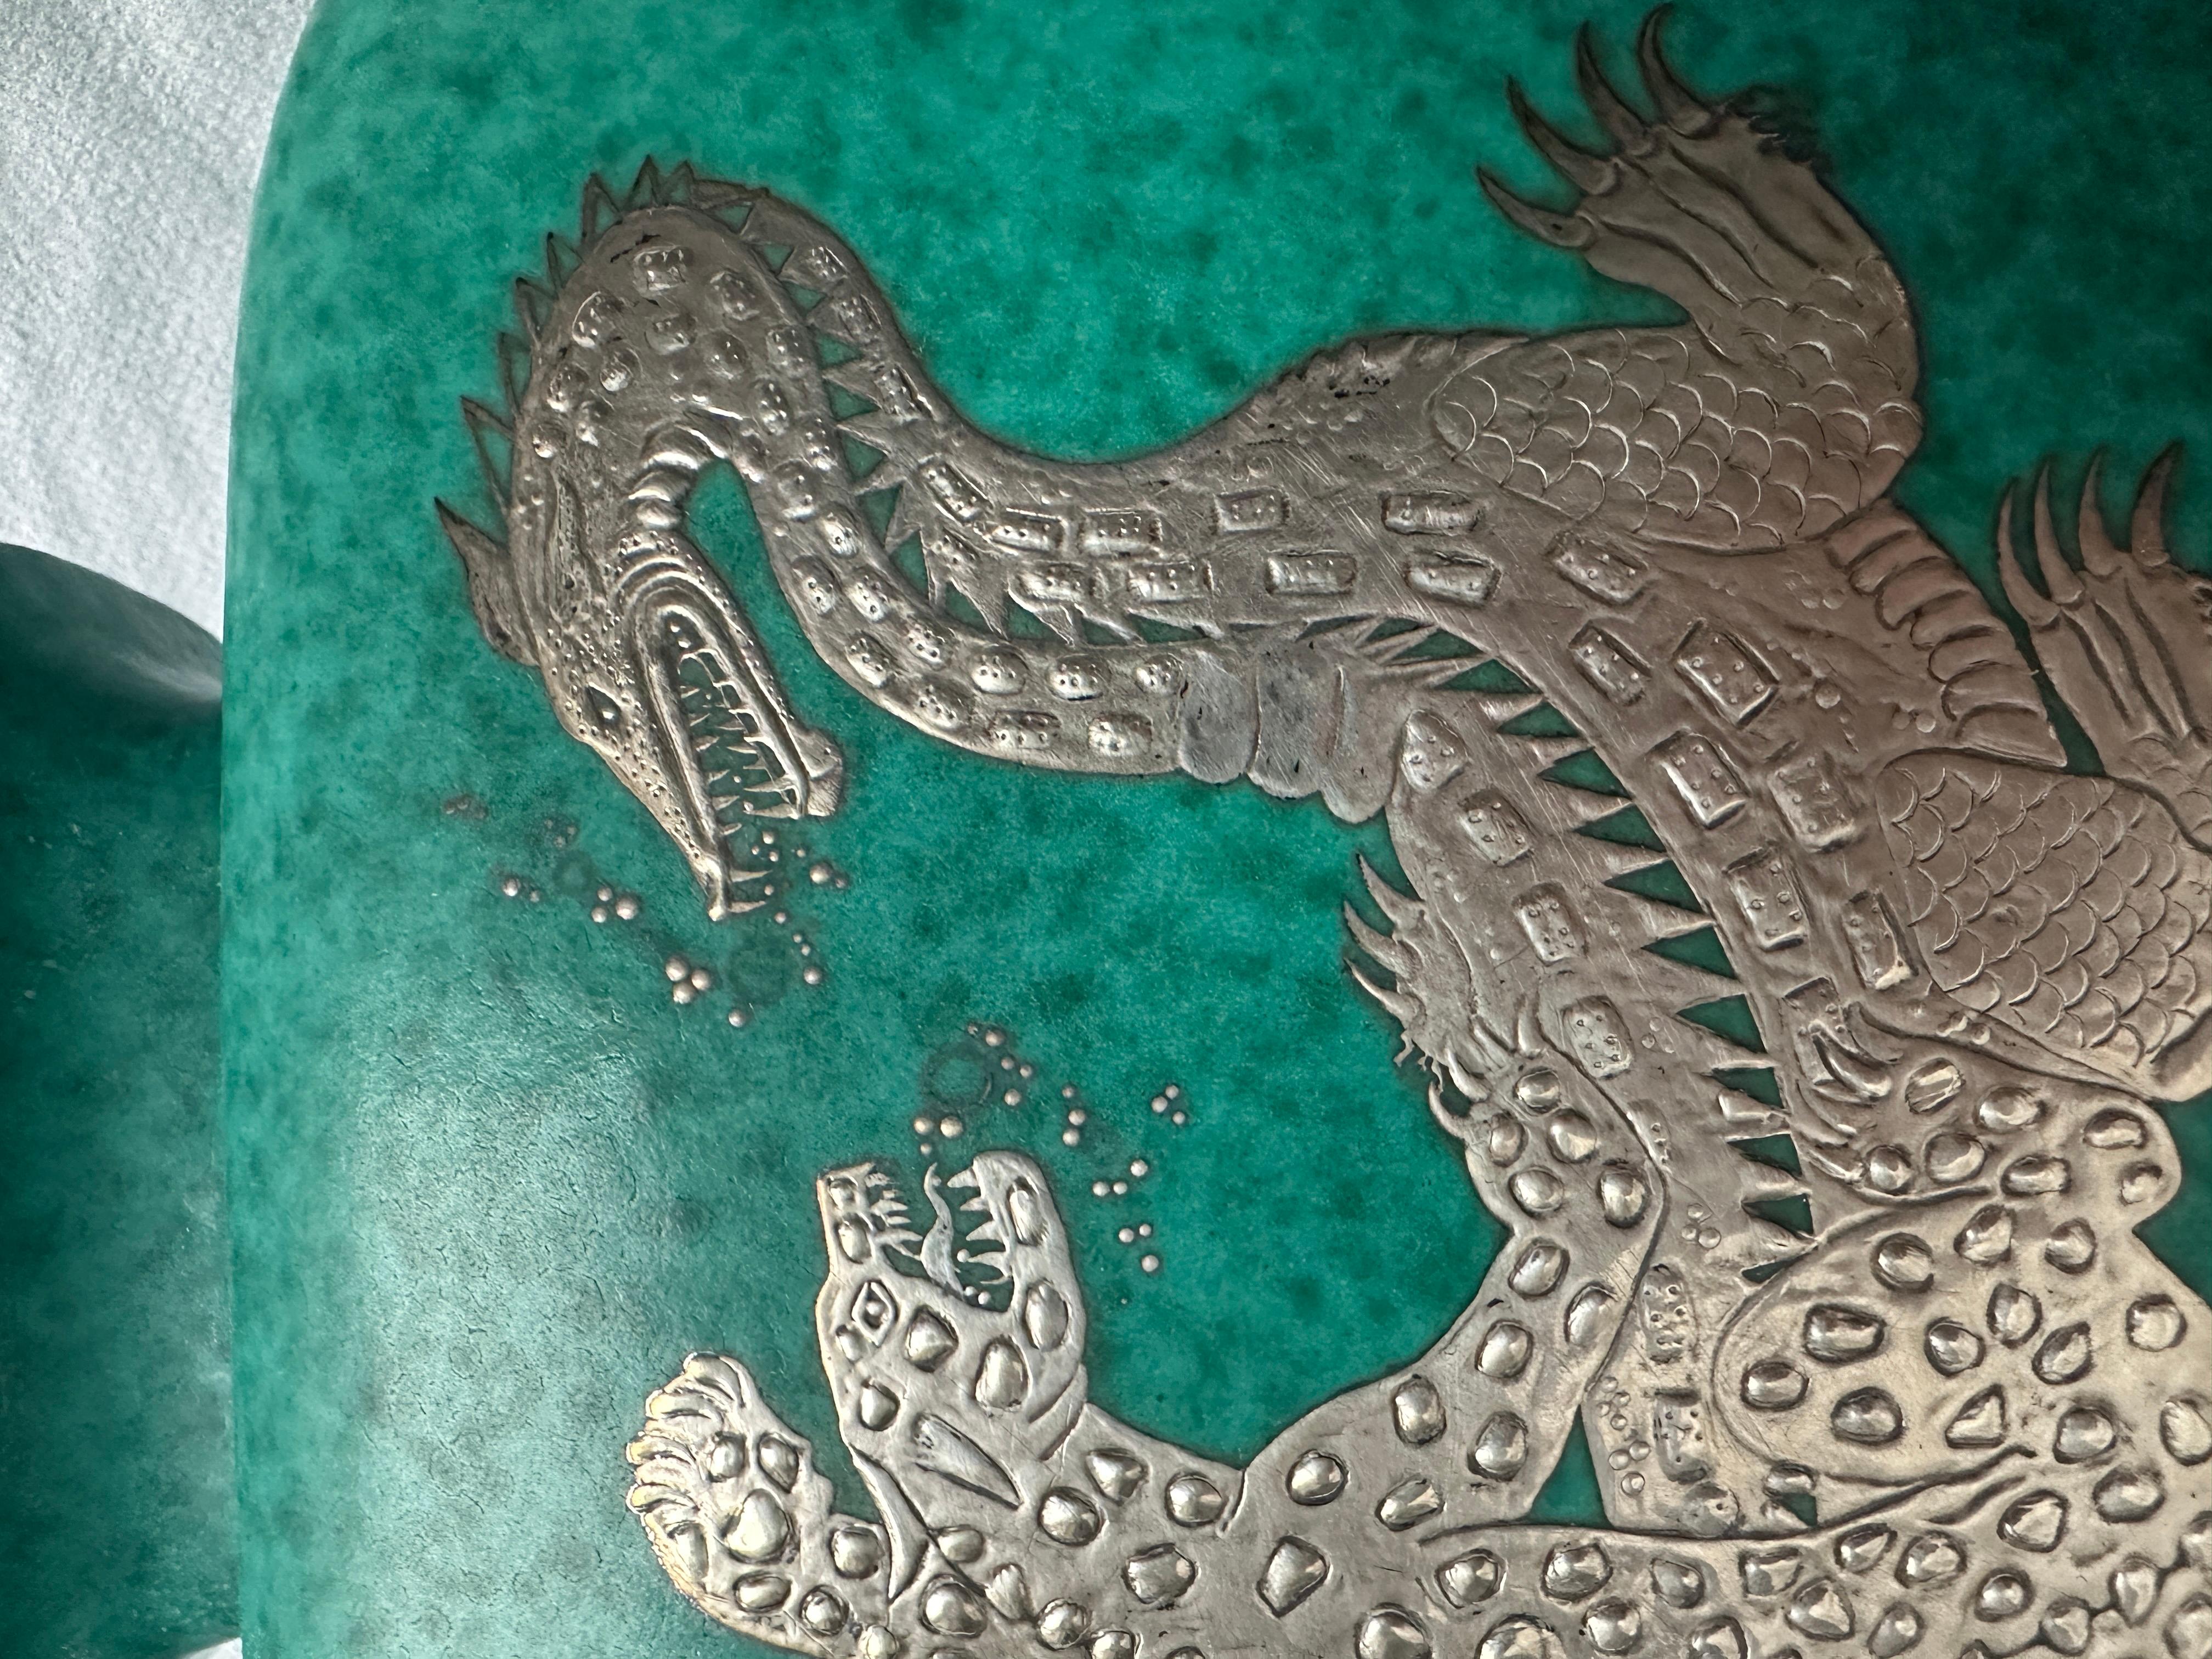 Very rare large urn, figuring silver inlay with a dragon and a panther one one side and stylised flowers on the other side. Signed GUSTAVSBERG ARGENTA with anchor 1207.

Wilhelm Kåge (1889-1960) is one of the most well-known representatives of the